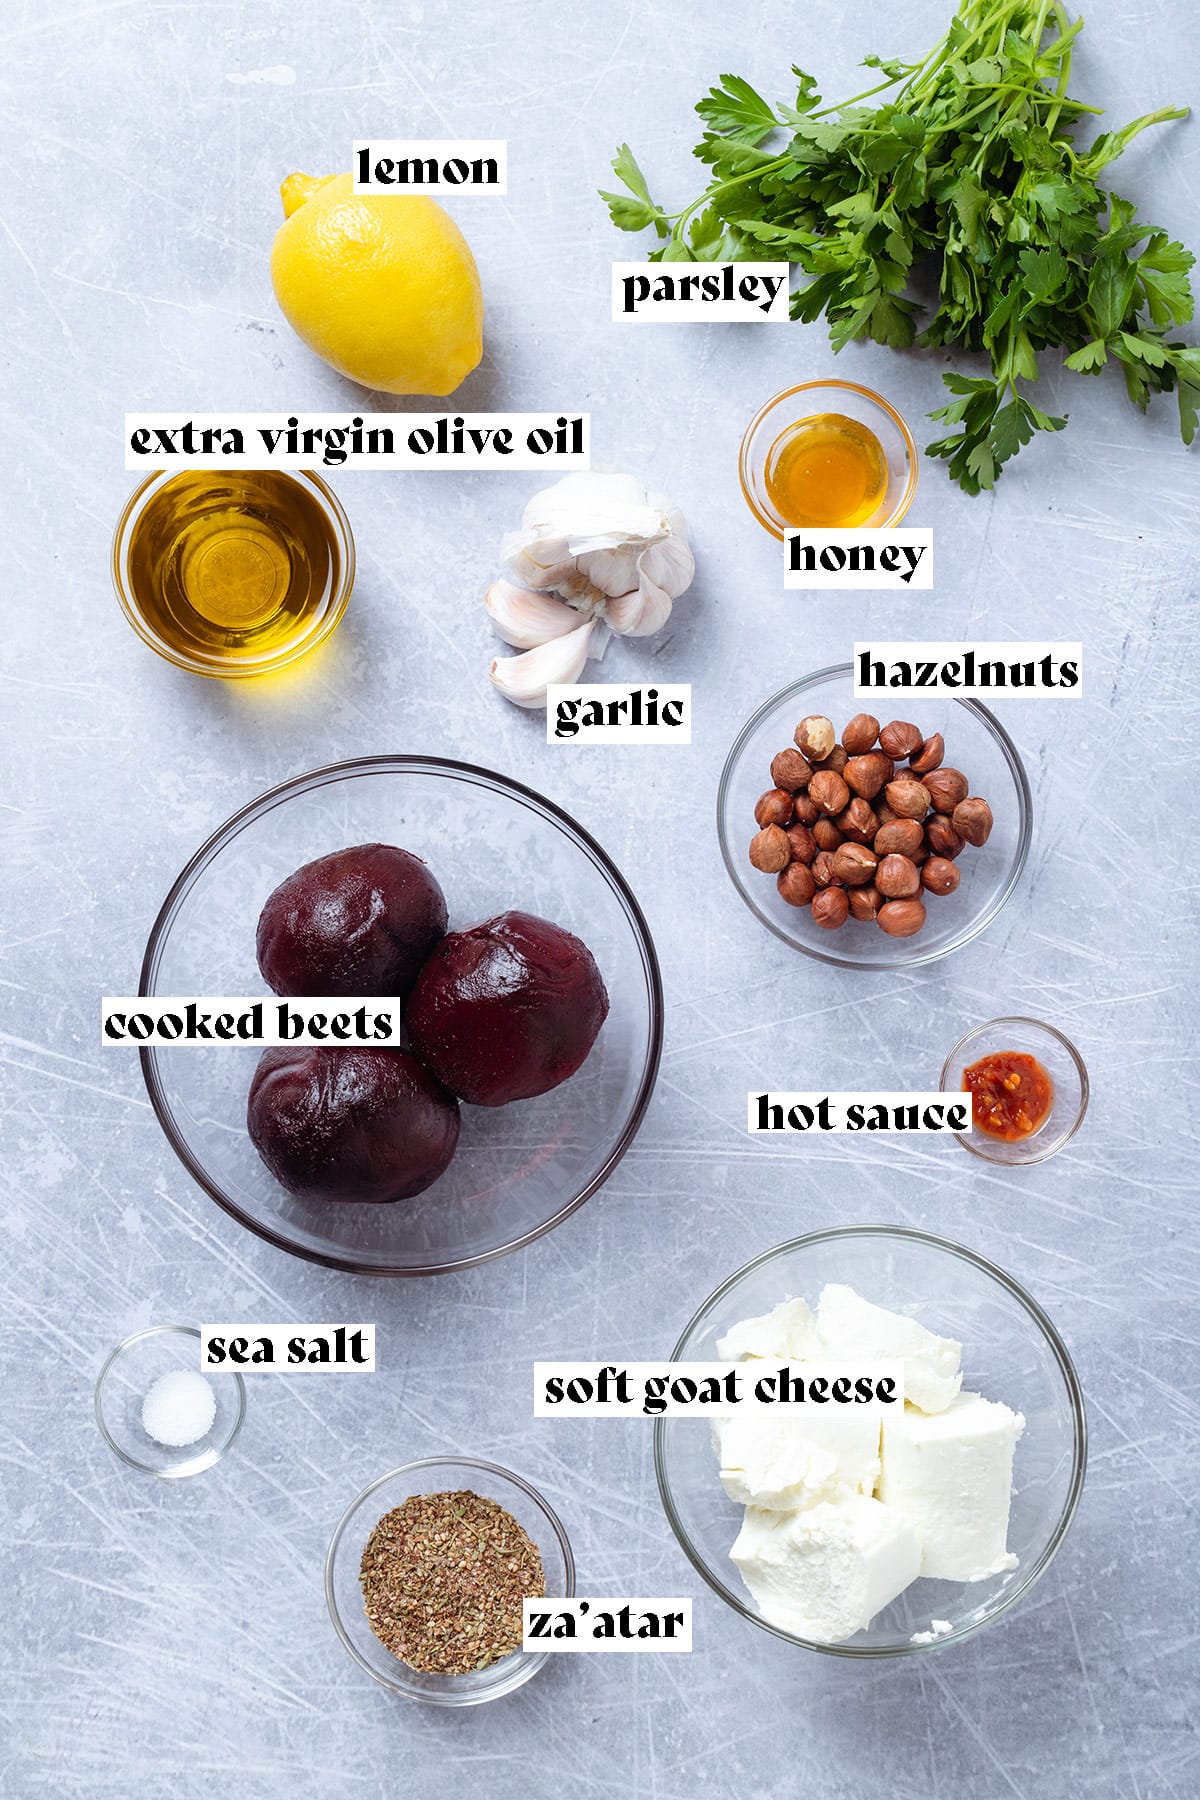 Ingredients like cooked beets, goat cheese, lemon, parsley, garlic, and hazelnuts laid out on a grey background.